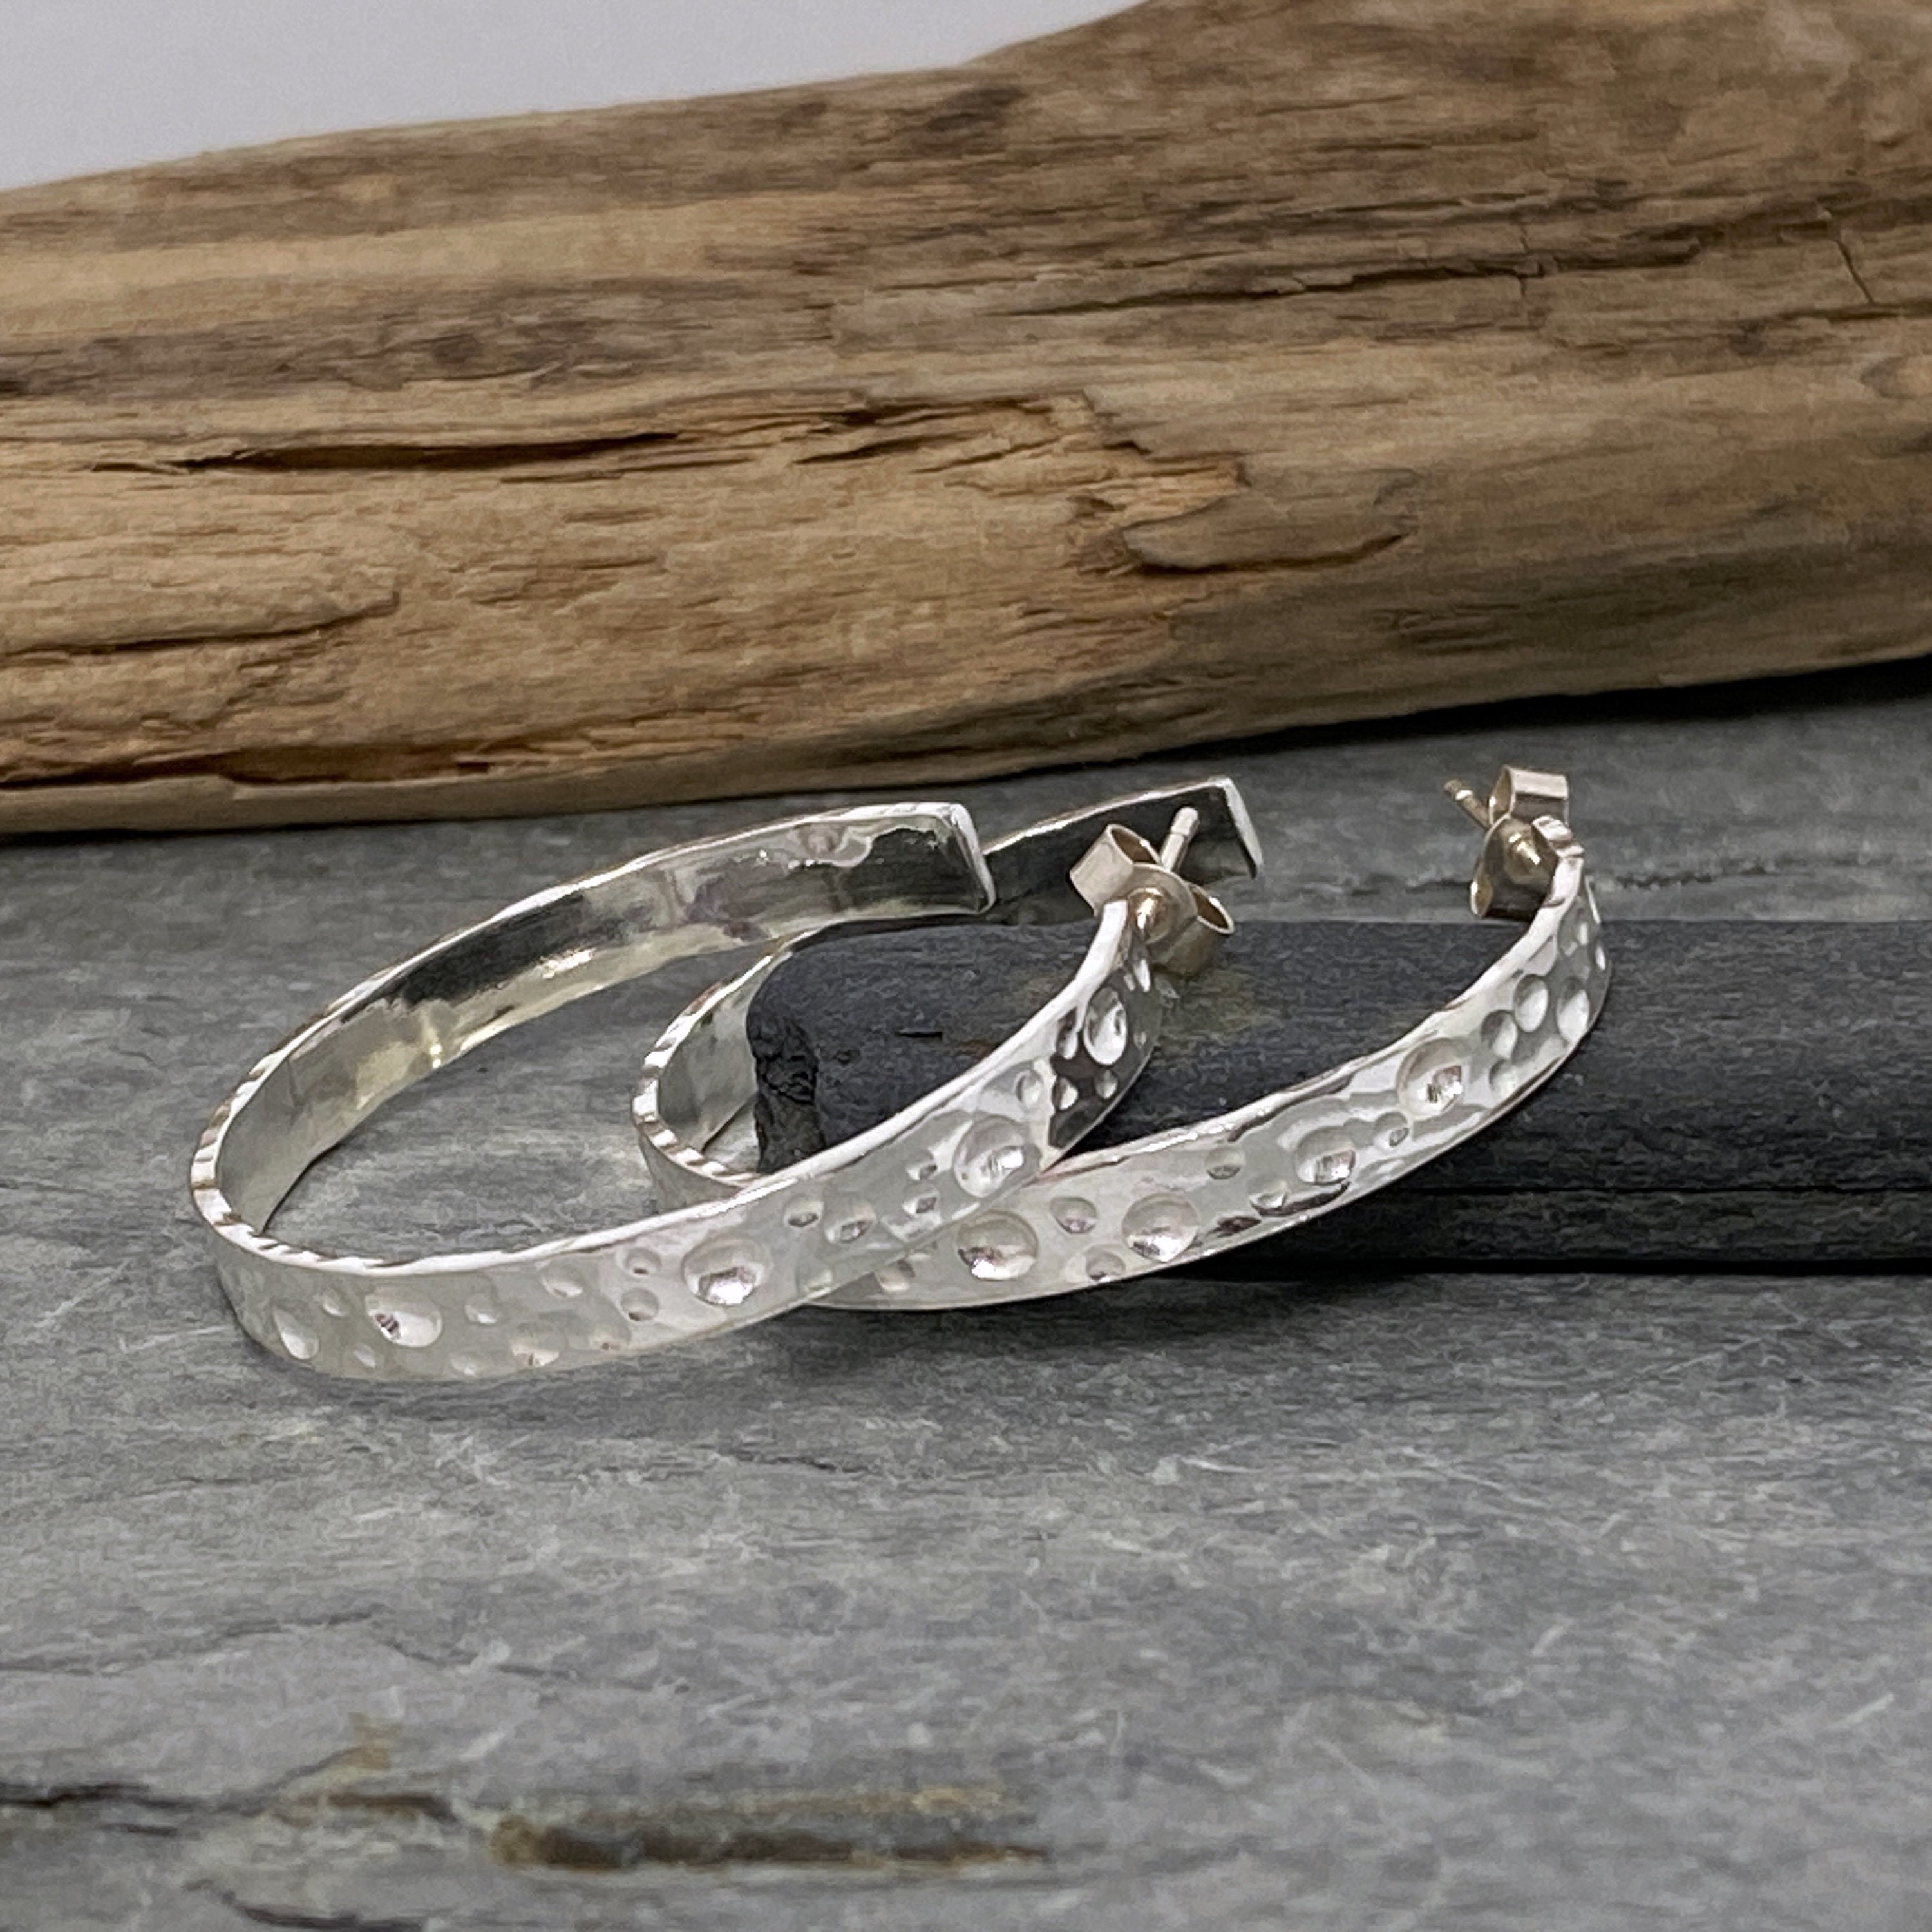 Silver Hoop Earrings With A Contemporary Patterned Surface, Silver Creole Earrings, Hammered Handmade